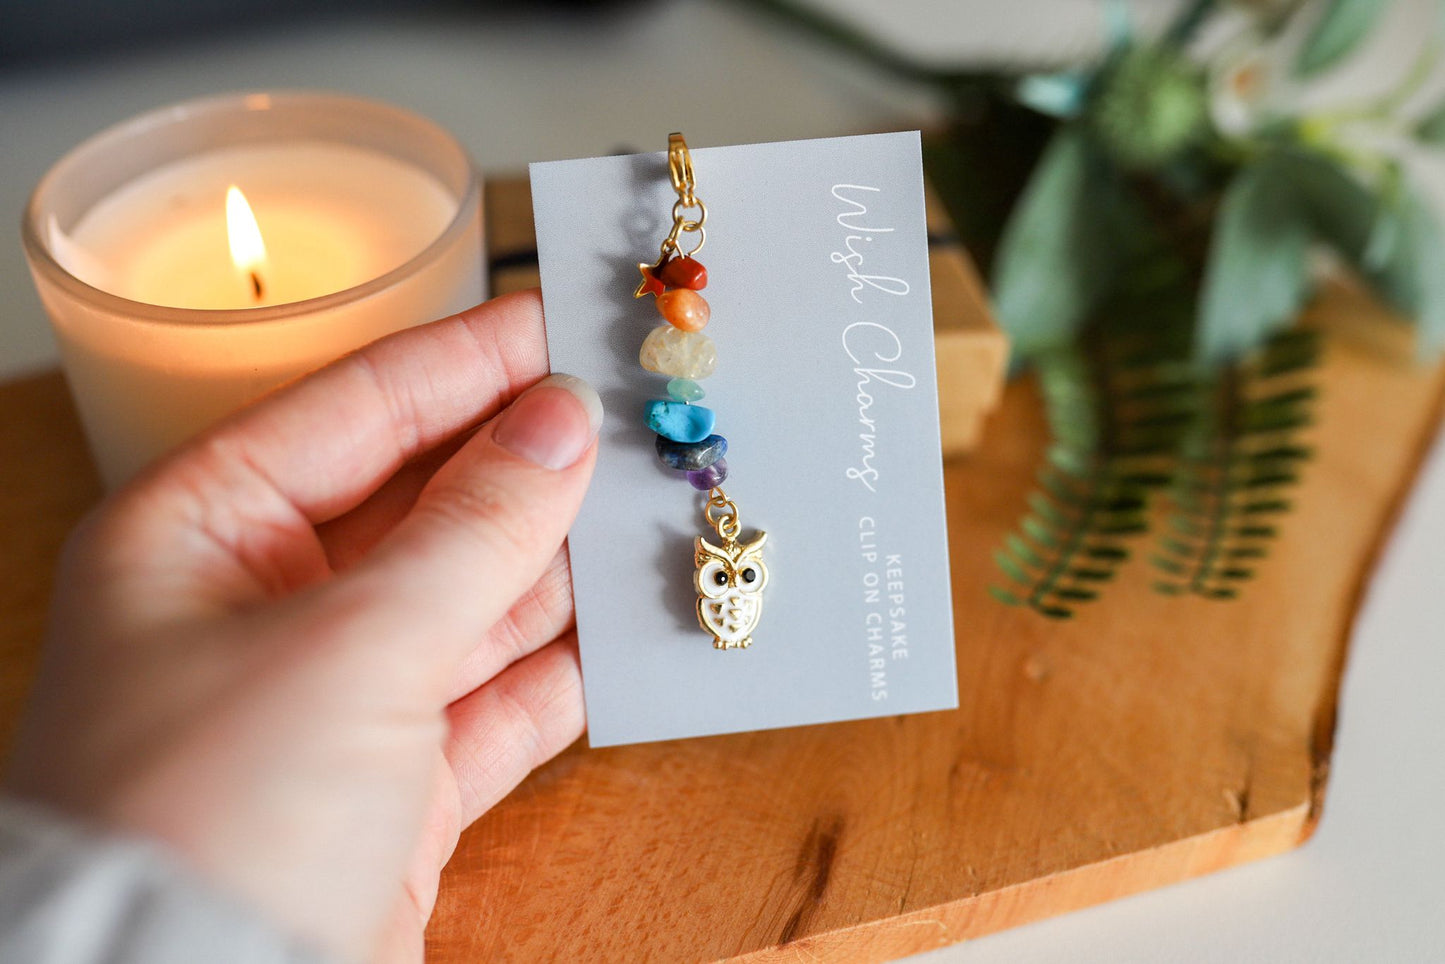 Feather, Chakra - Wish Charms - Keepsake Clip on Charm with Gemstones